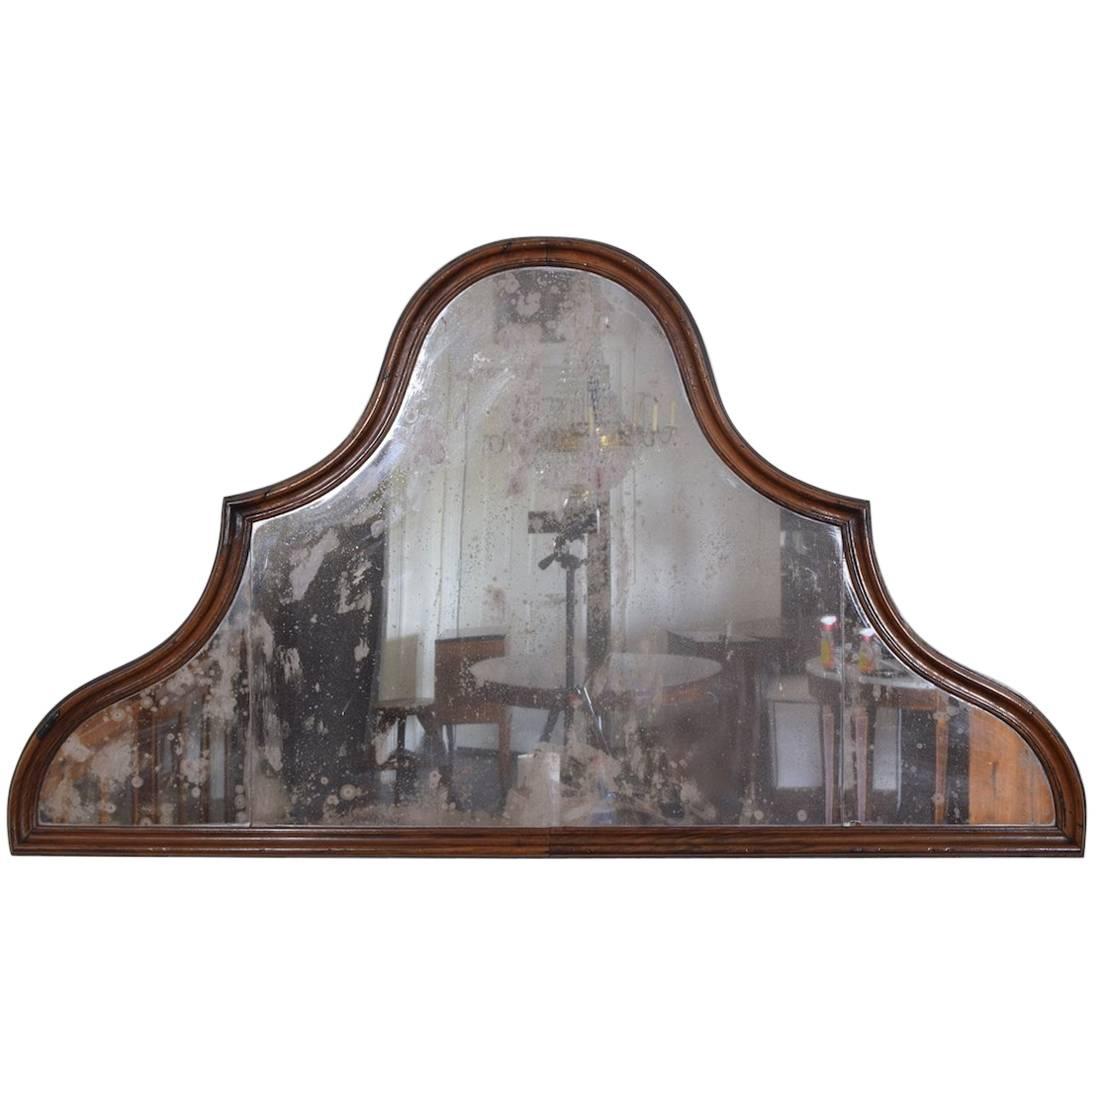 Having an unusual shape and retaining its original three mirror plates, mid-18th century and possibly earlier.